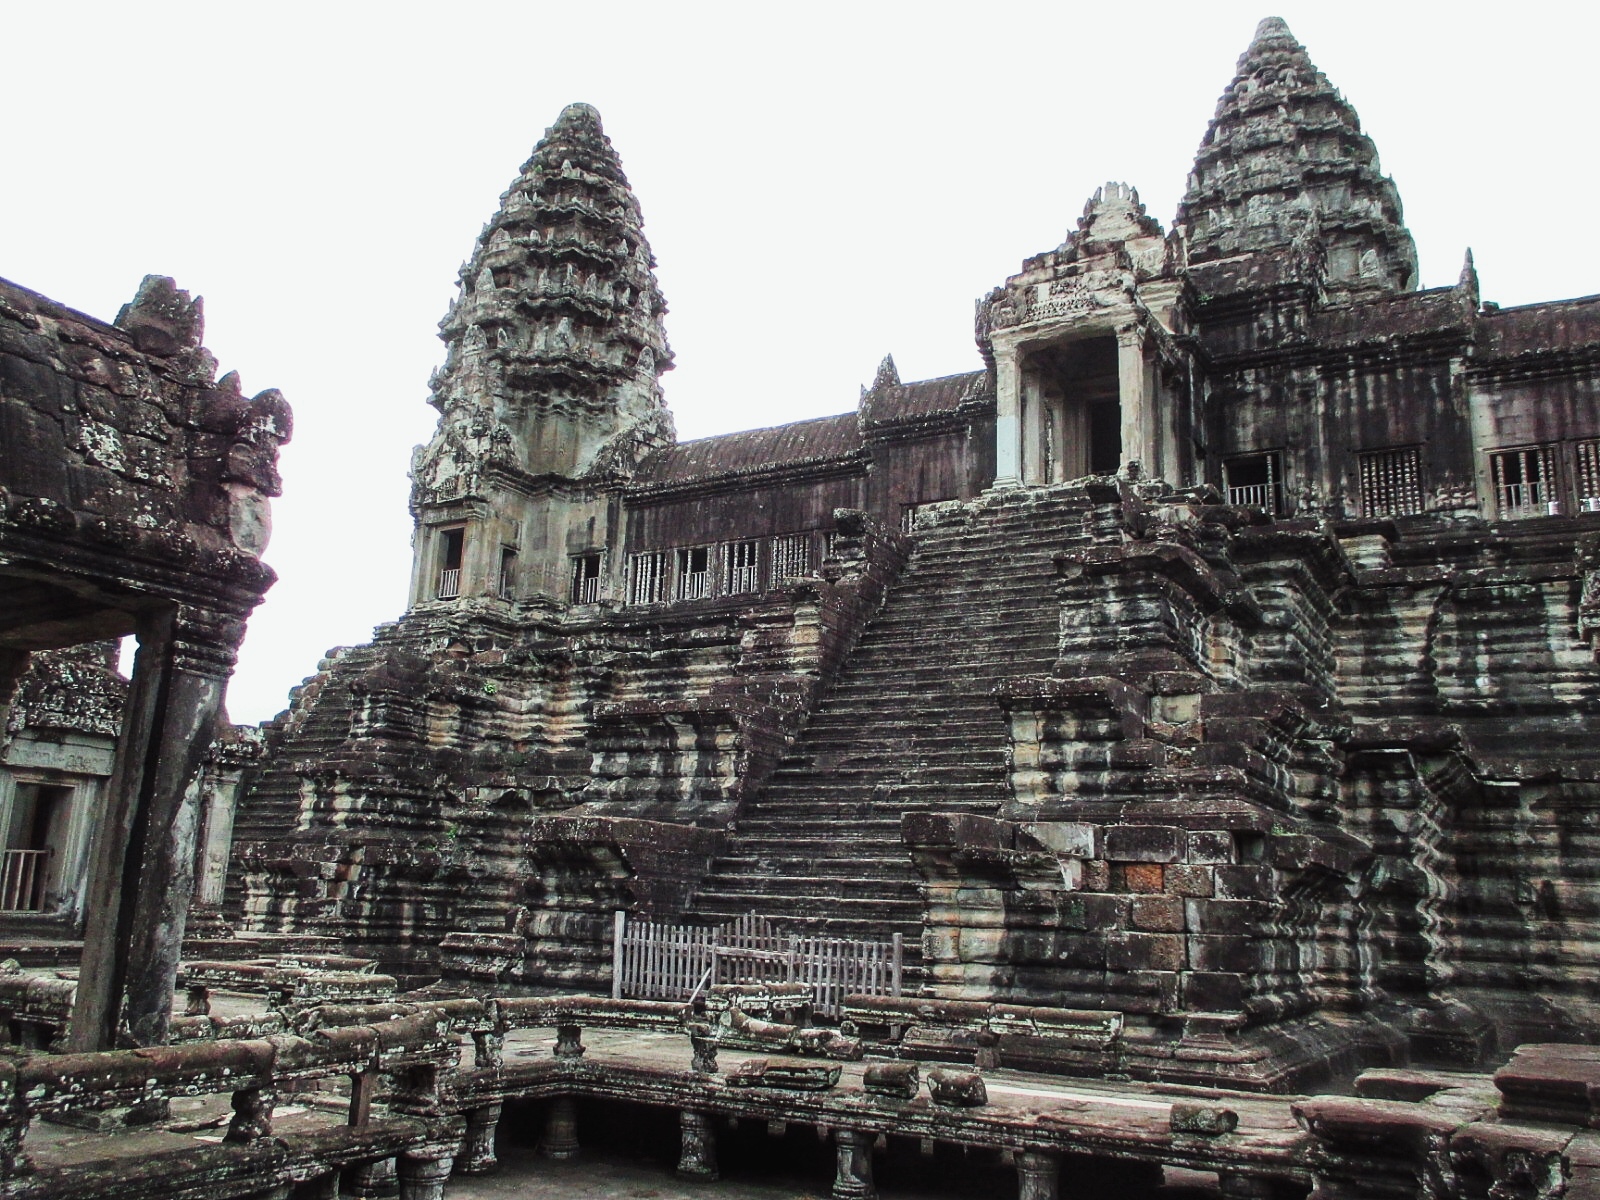 Quincunx of towers in Angkor Wat showcase the design and craftsmanship of Khmer architecture